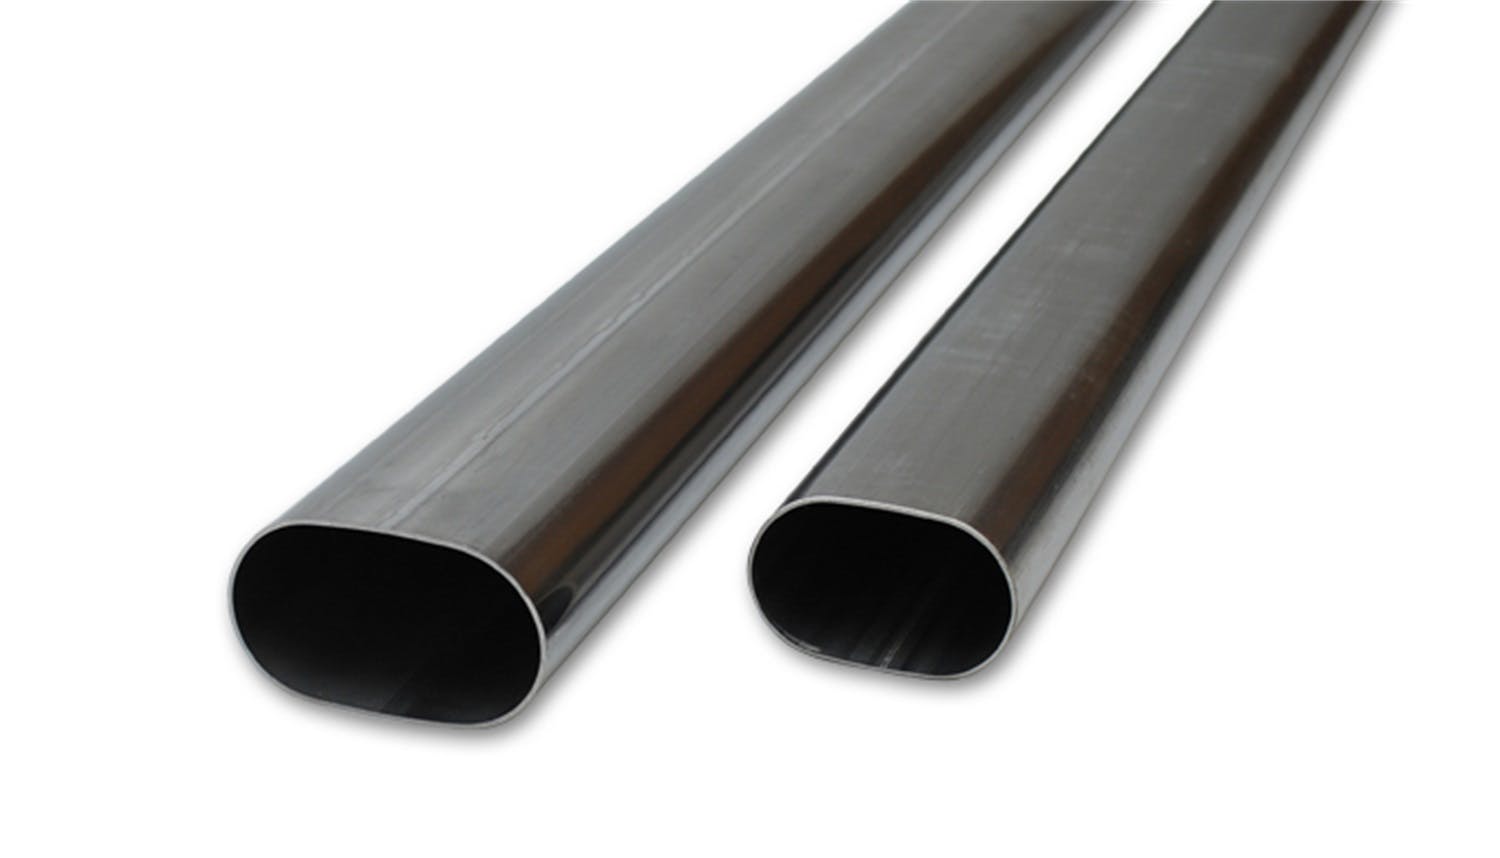 Vibrant Performance 13183 3.5 inch Oval (nominal) T304 Stainless Steel Straight Tubing - 5 feet long